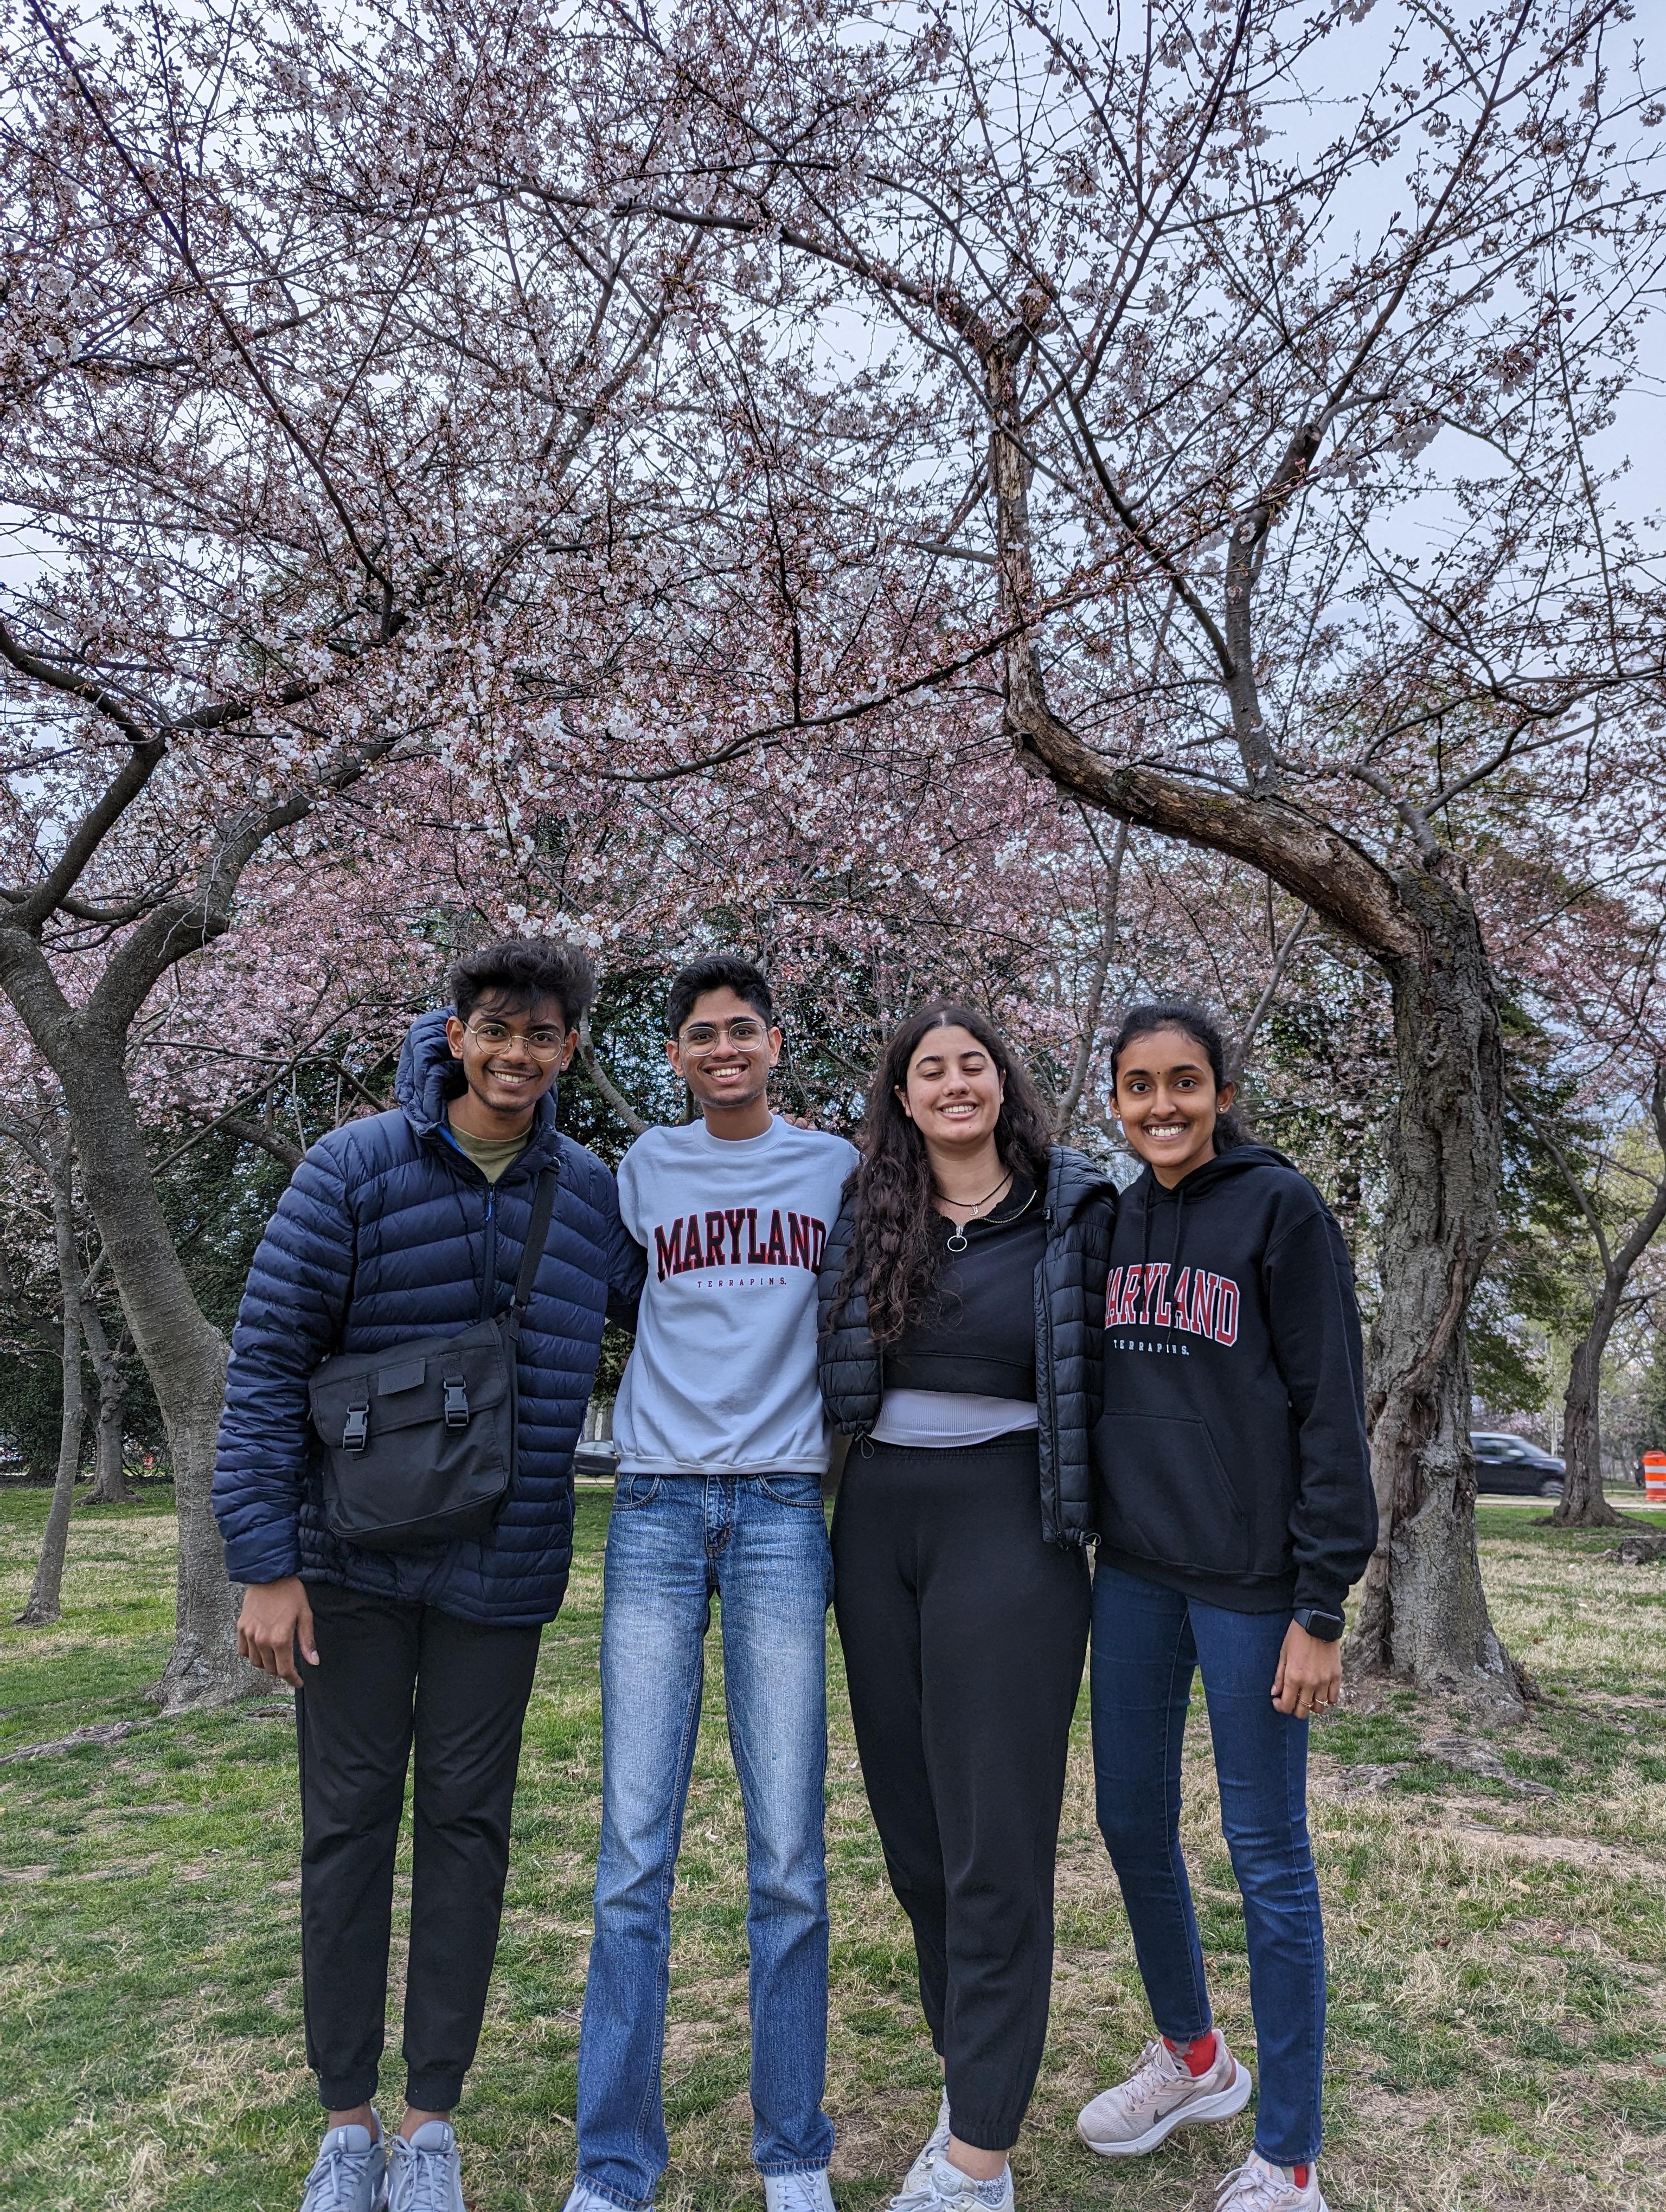 UMD exchange students pose in front of D.C. cherry blossoms.